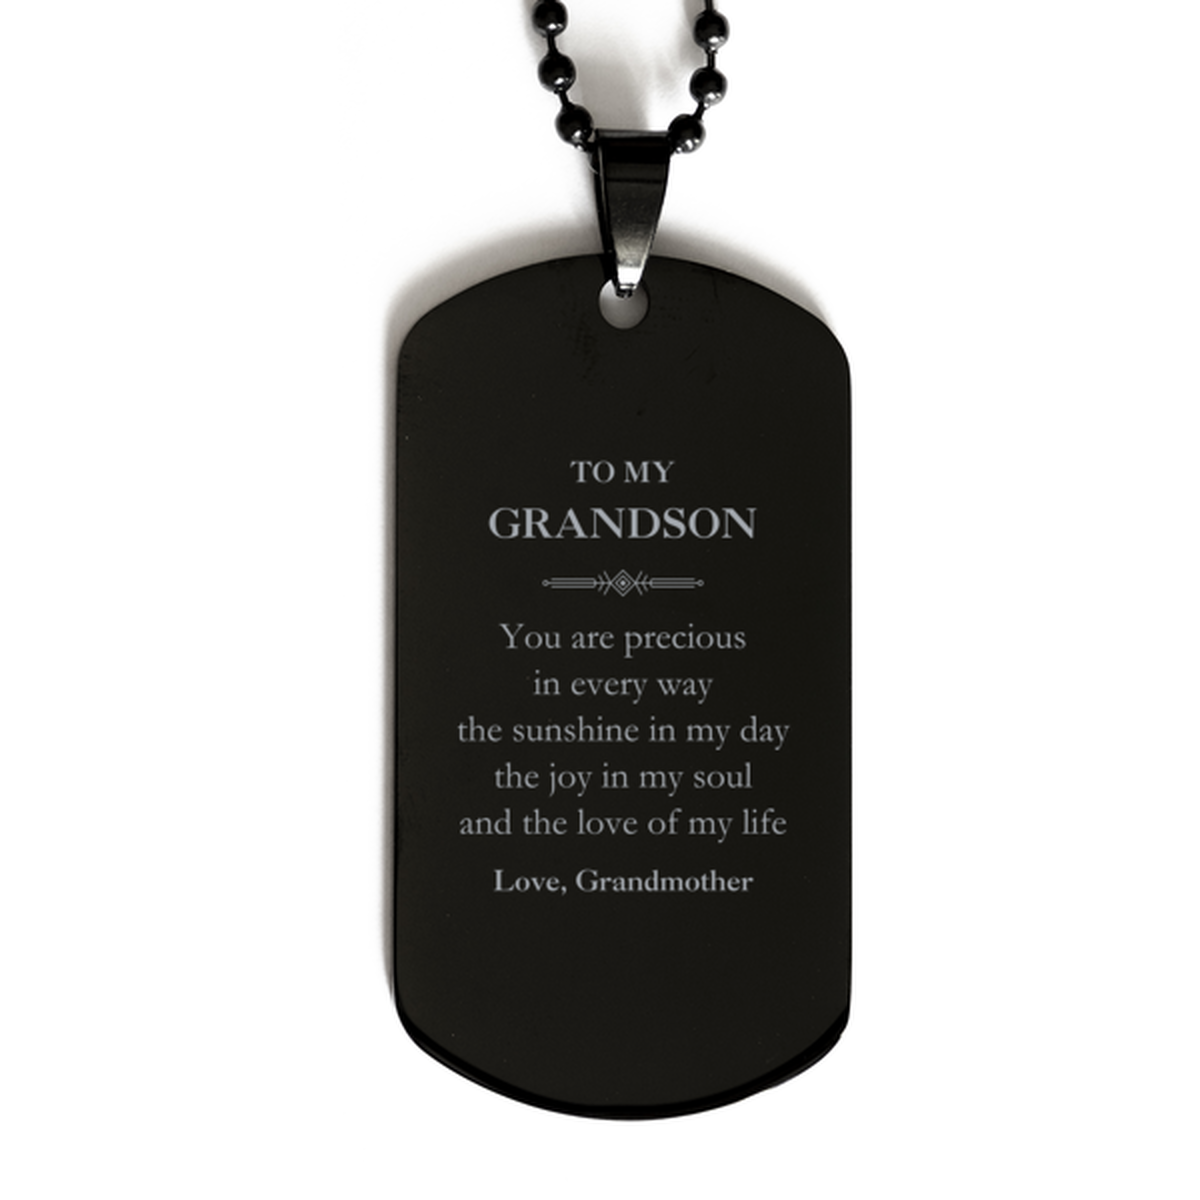 Graduation Gifts for Grandson Black Dog Tag Present from Grandmother, Christmas Grandson Birthday Gifts Grandson You are precious in every way the sunshine in my day. Love, Grandmother